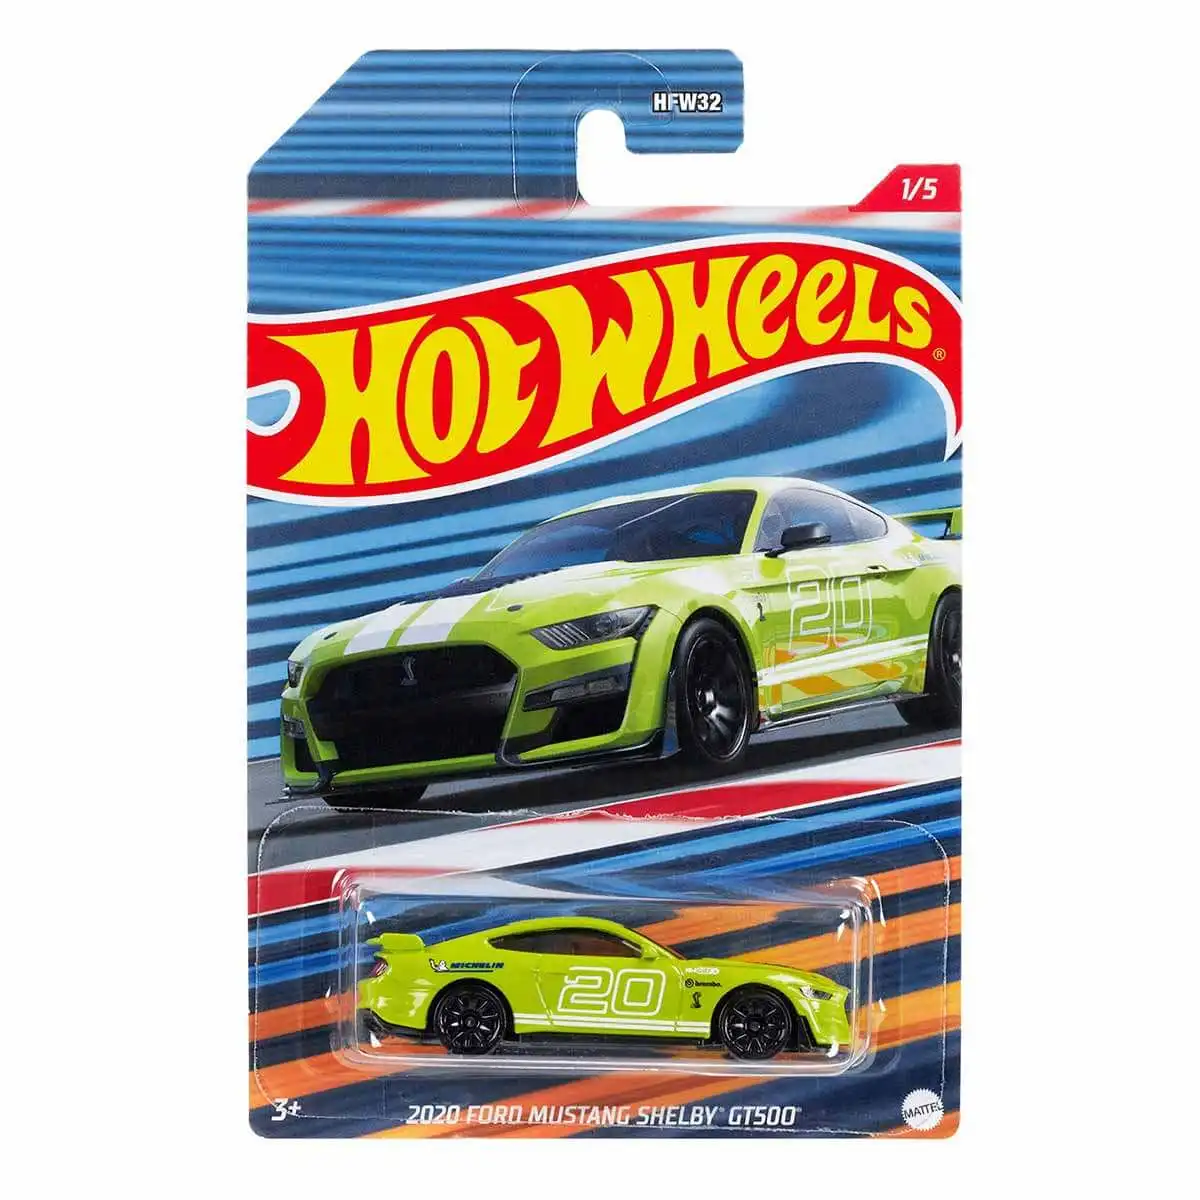 

Hot Wheels Premium Racing Circuit 2020 Ford Mustang Shelby GT500 1/64 Metal Diecast Model Collection Toy Vehicles JDM Collectors